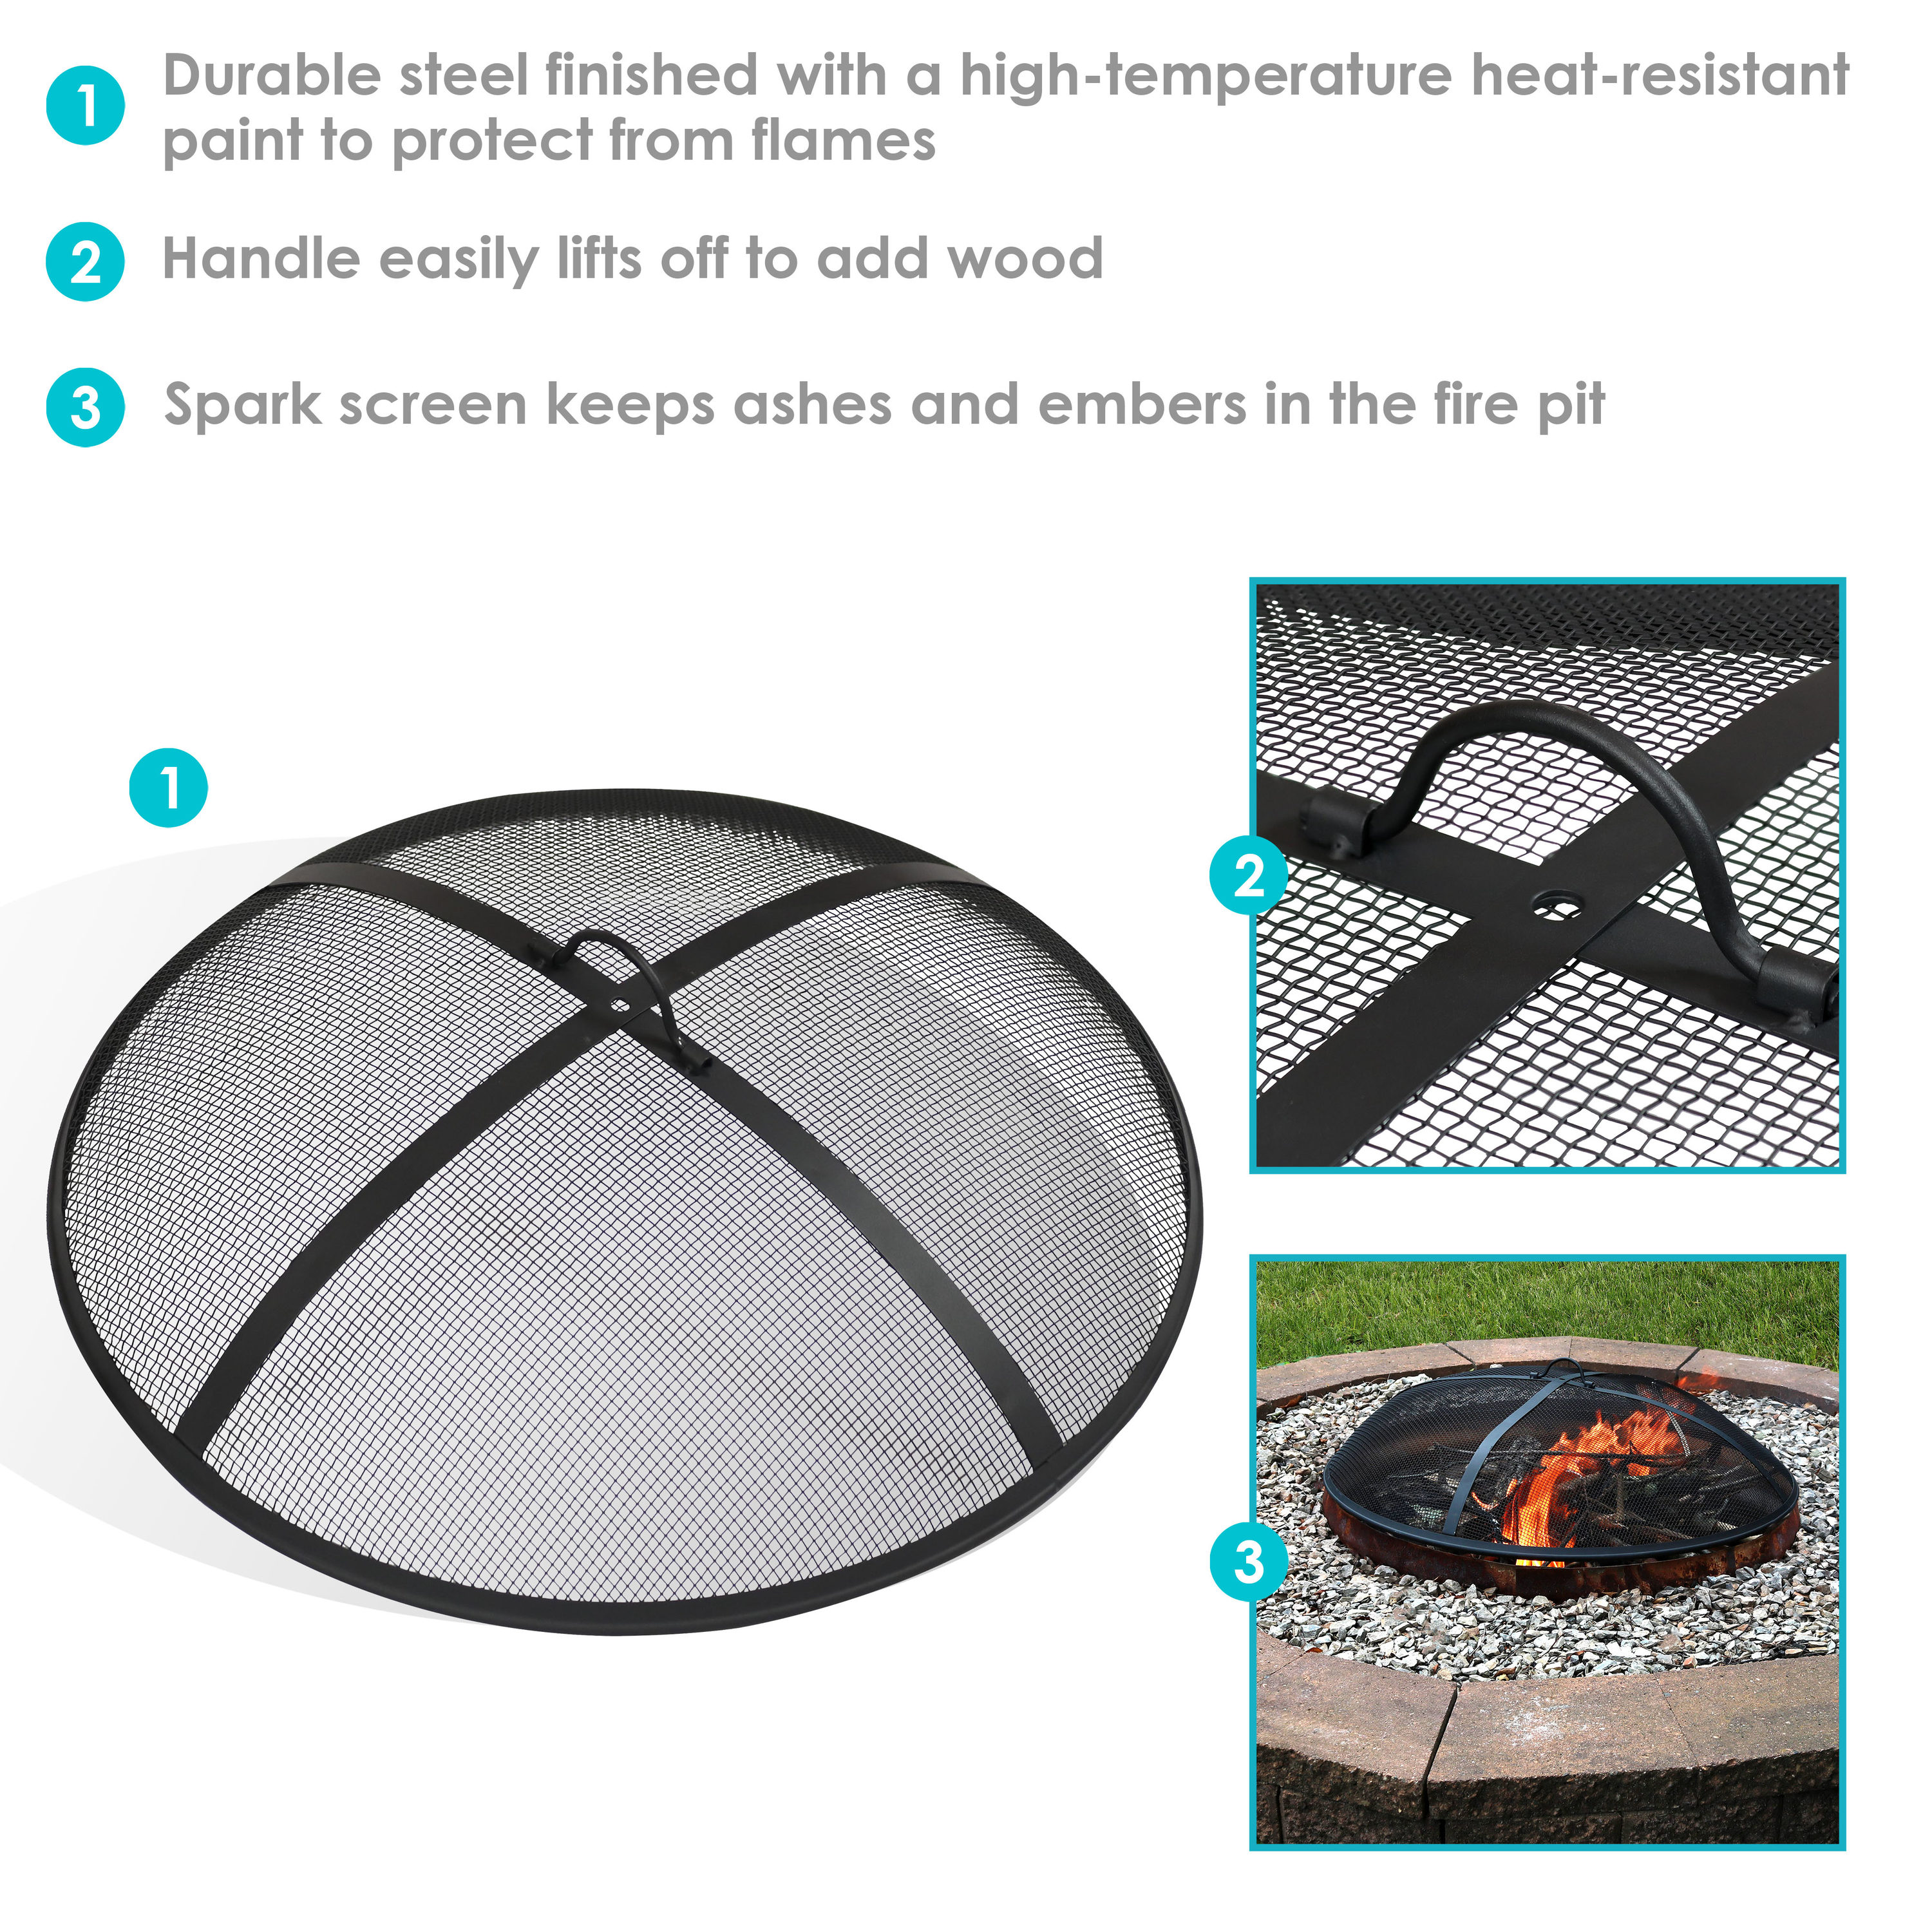 Durable Black Metal Mesh Design 40-Inch Diameter Outdoor Heavy-Duty Round Fire Screen with Ring Handle Patio Fire Pit Accessory Sunnydaze Reinforced Steel Mesh Spark Screen 